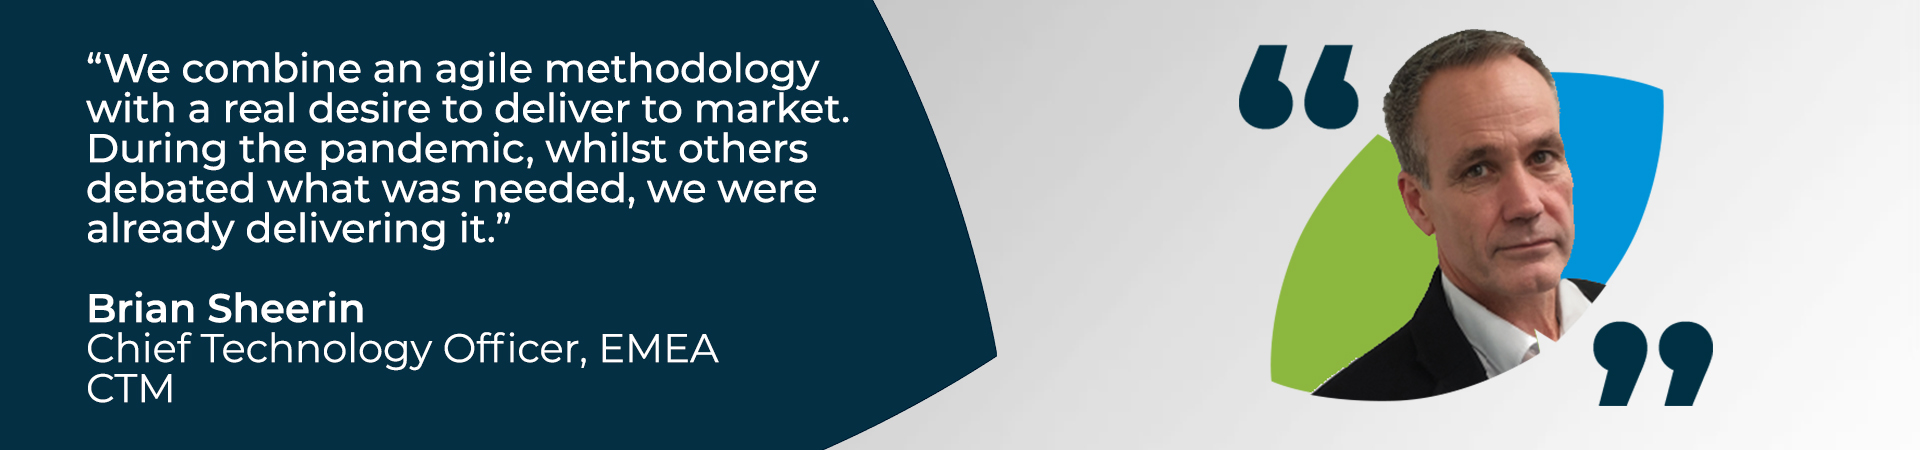 Banner - "We combine an agile methodology with a real desire to deliver to market. During the pandemic, whilst others debated what was needed, we were already delivering it" - CTM EMEA's Chief Technology Officer quote